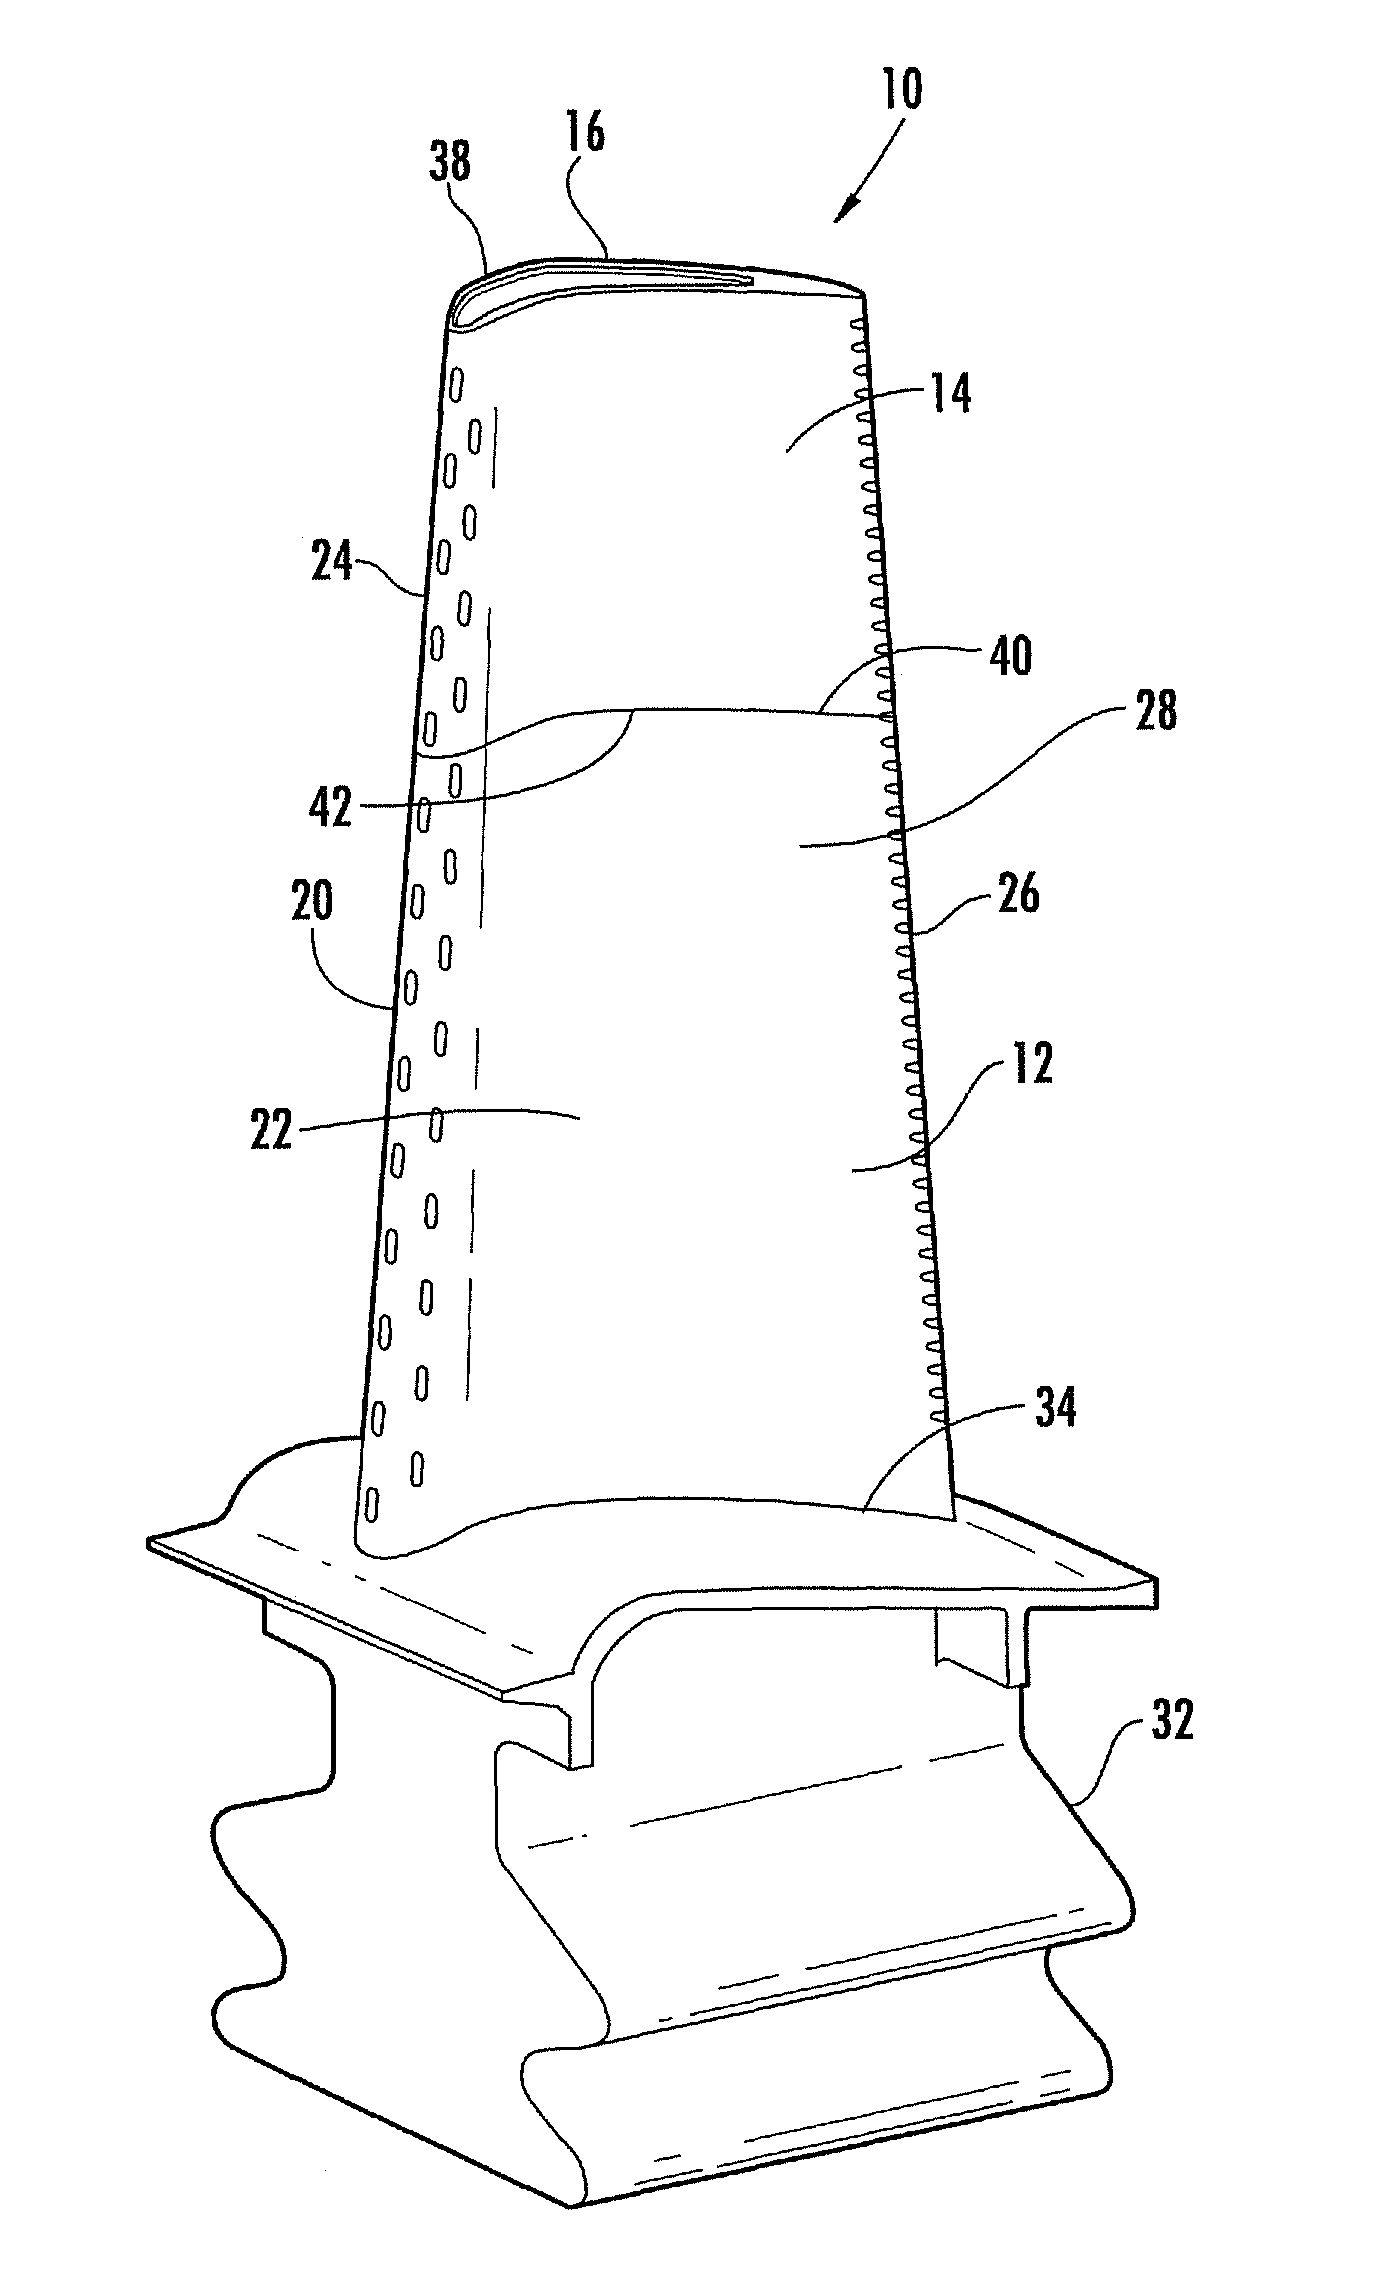 Turbine airfoil having outboard and inboard sections